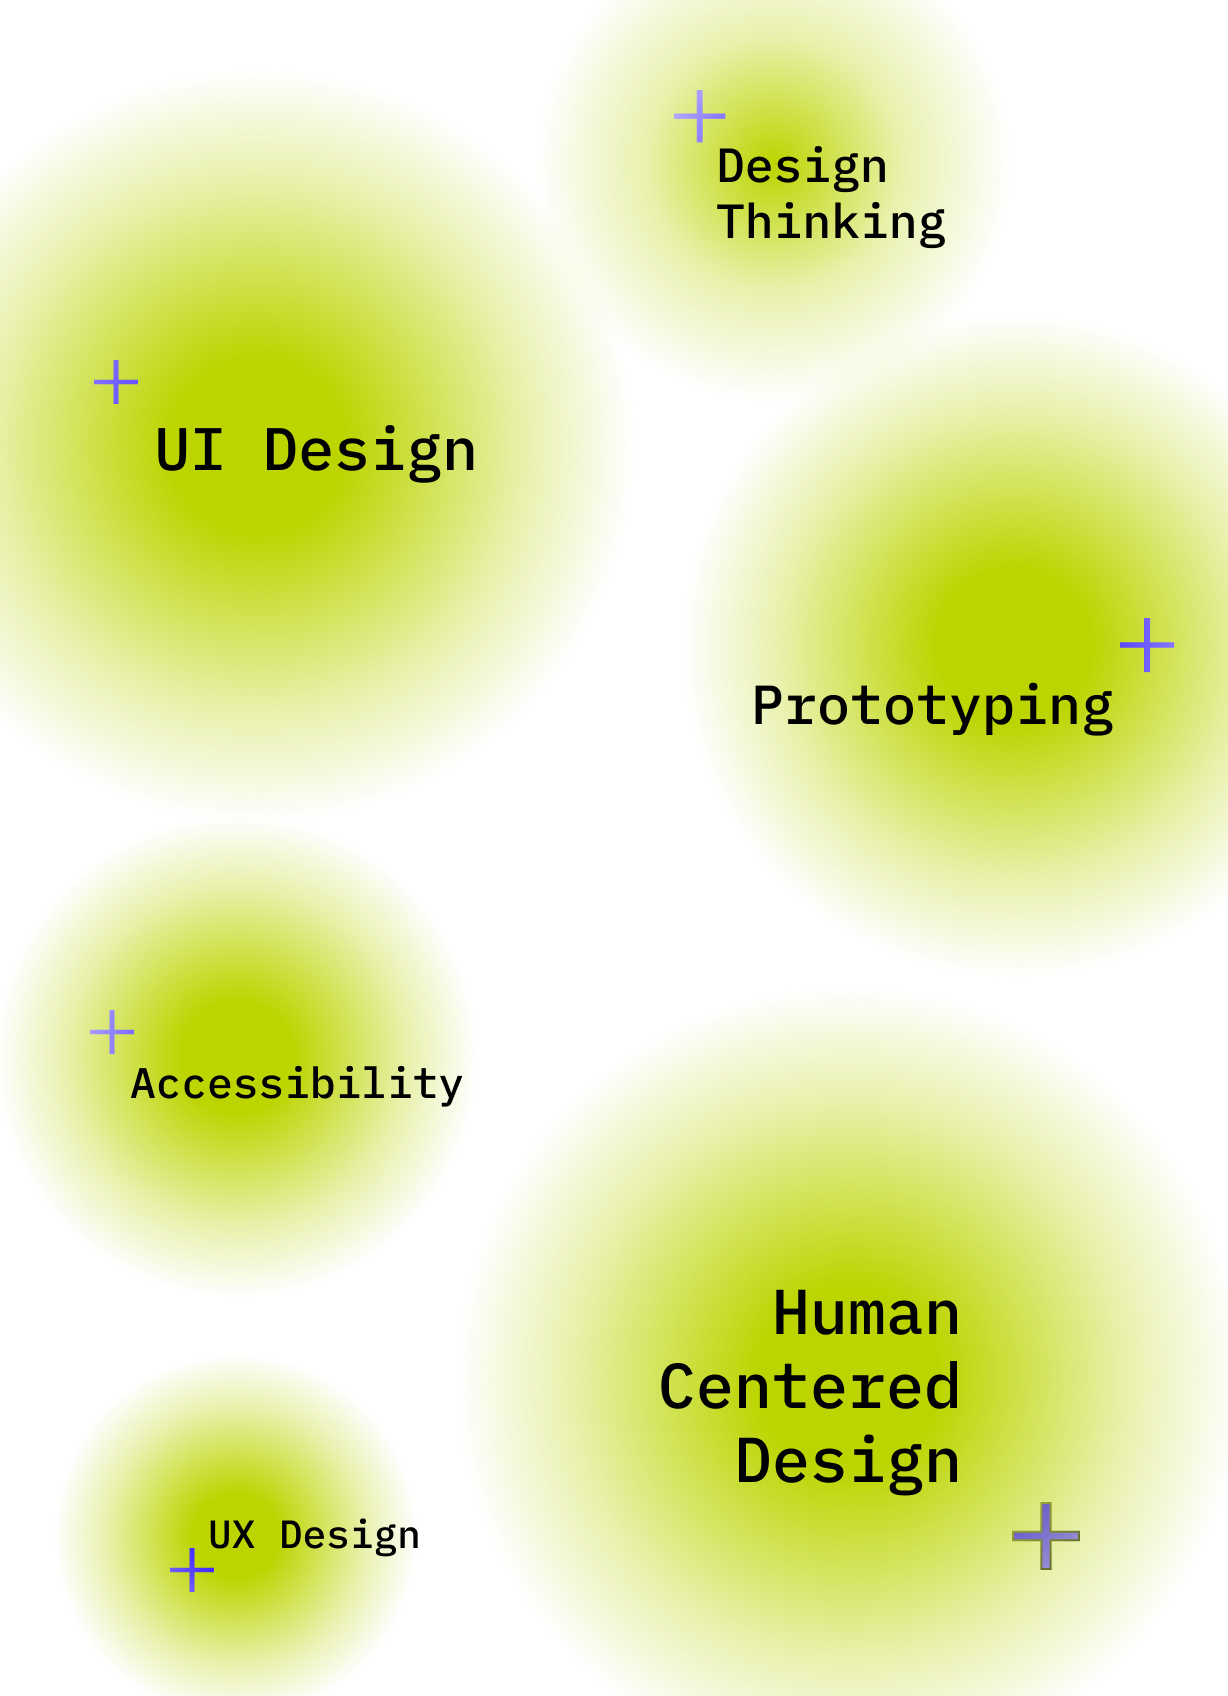 A stylized list of things you can learn in Experience Design: Design Thinking, UI Design, Prototyping, Accessibility, Human Centered Design, UX Design